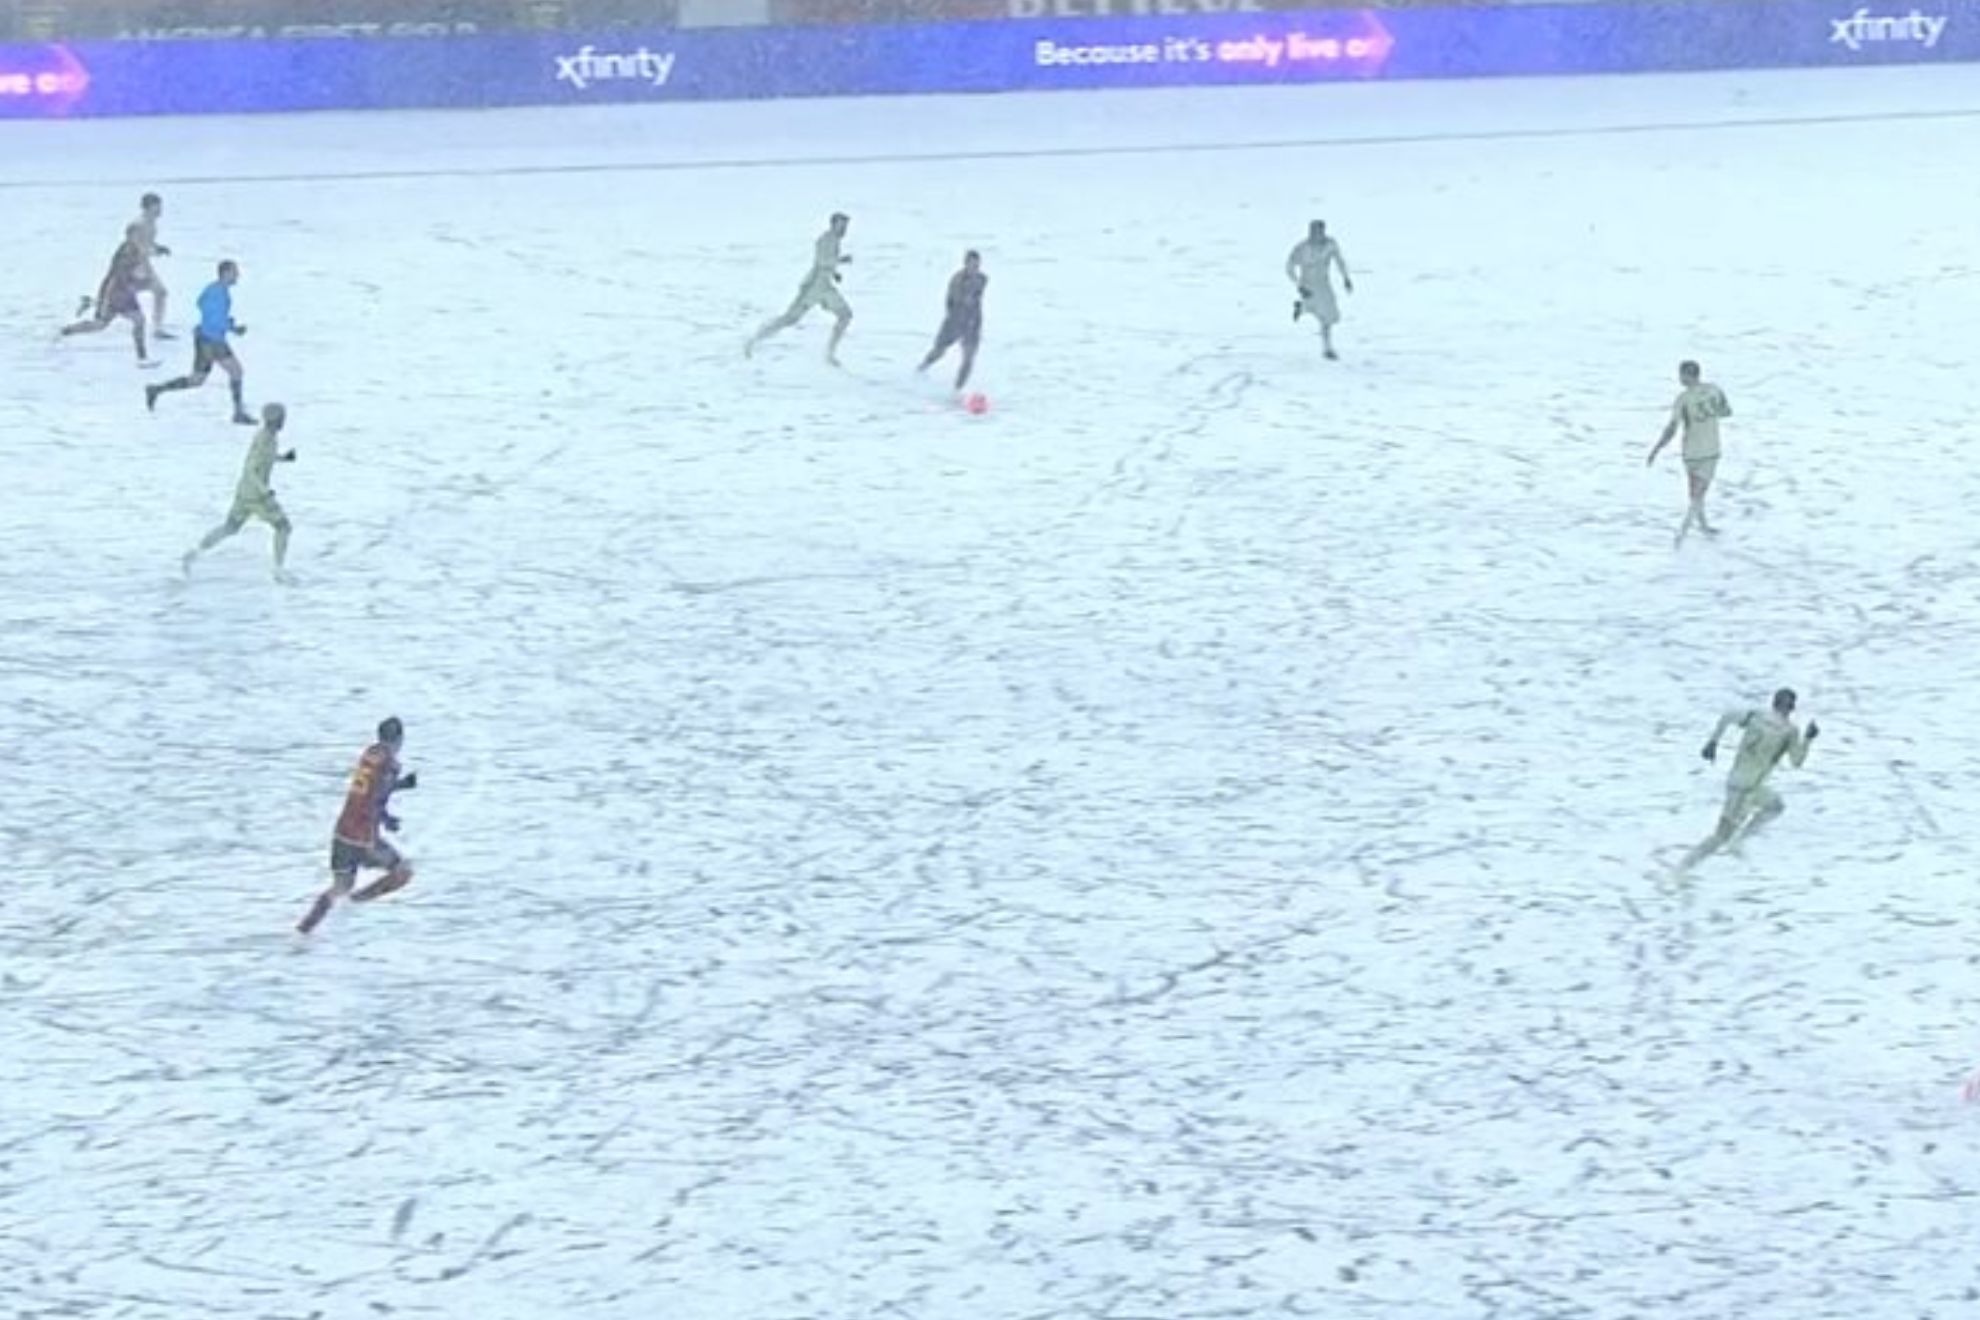 Real Salt Lake have snow problem dominating LAFC amid near blizzard